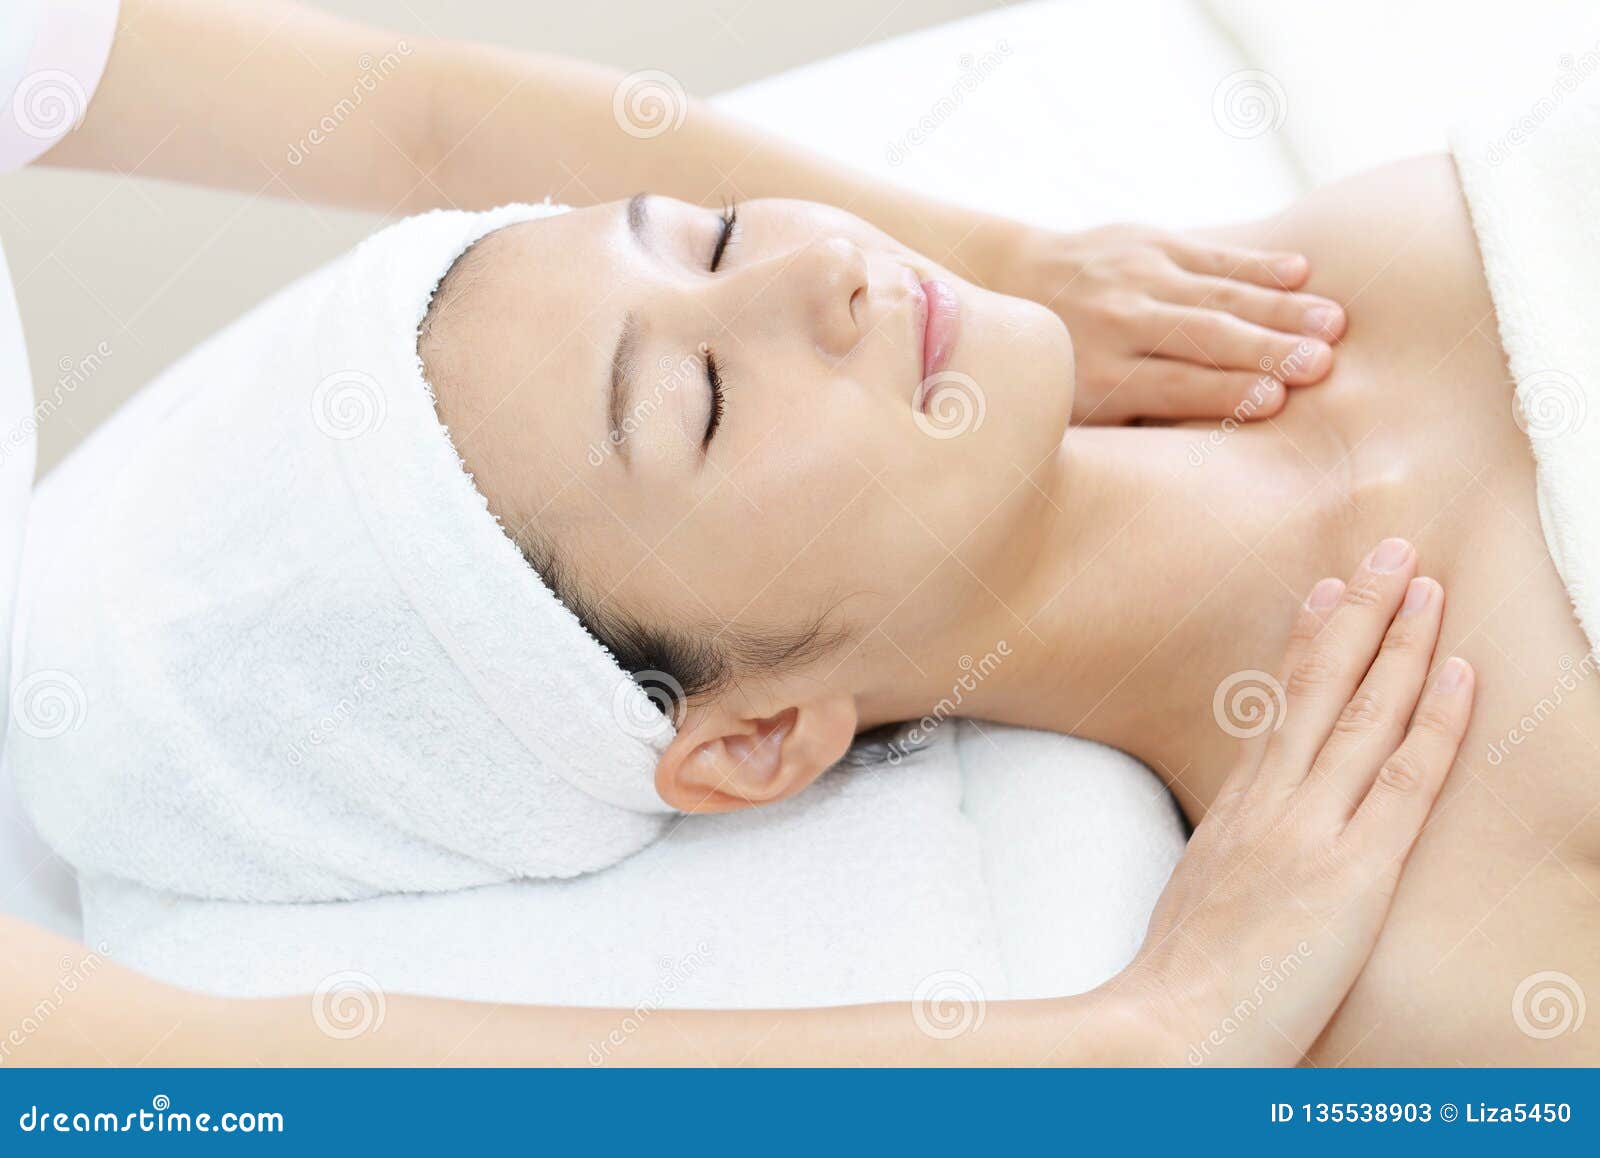 Spa Massage For Beautiful Pretty Woman Stock Image Image Of Healthy